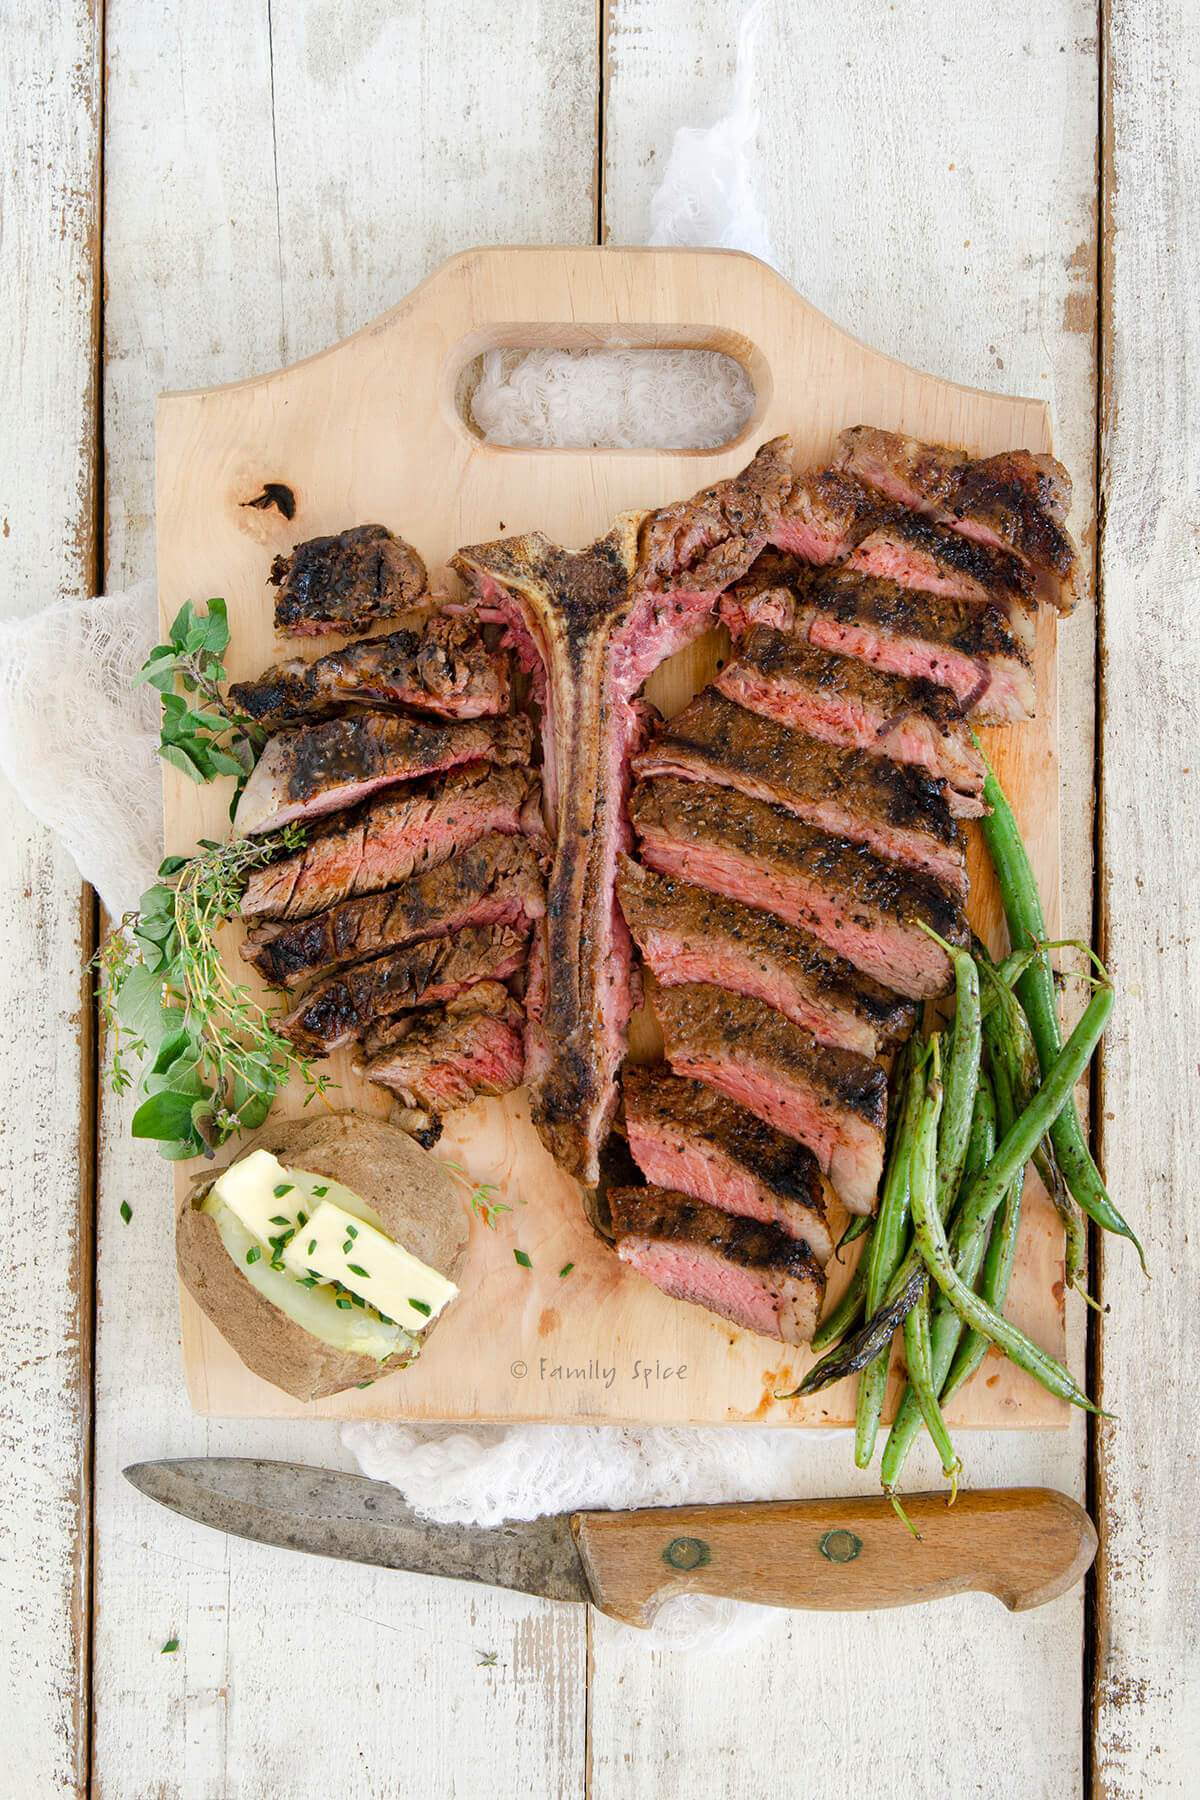 Top view of a sliced grilled porterhouse steak on a cutting board with a potato and green beans